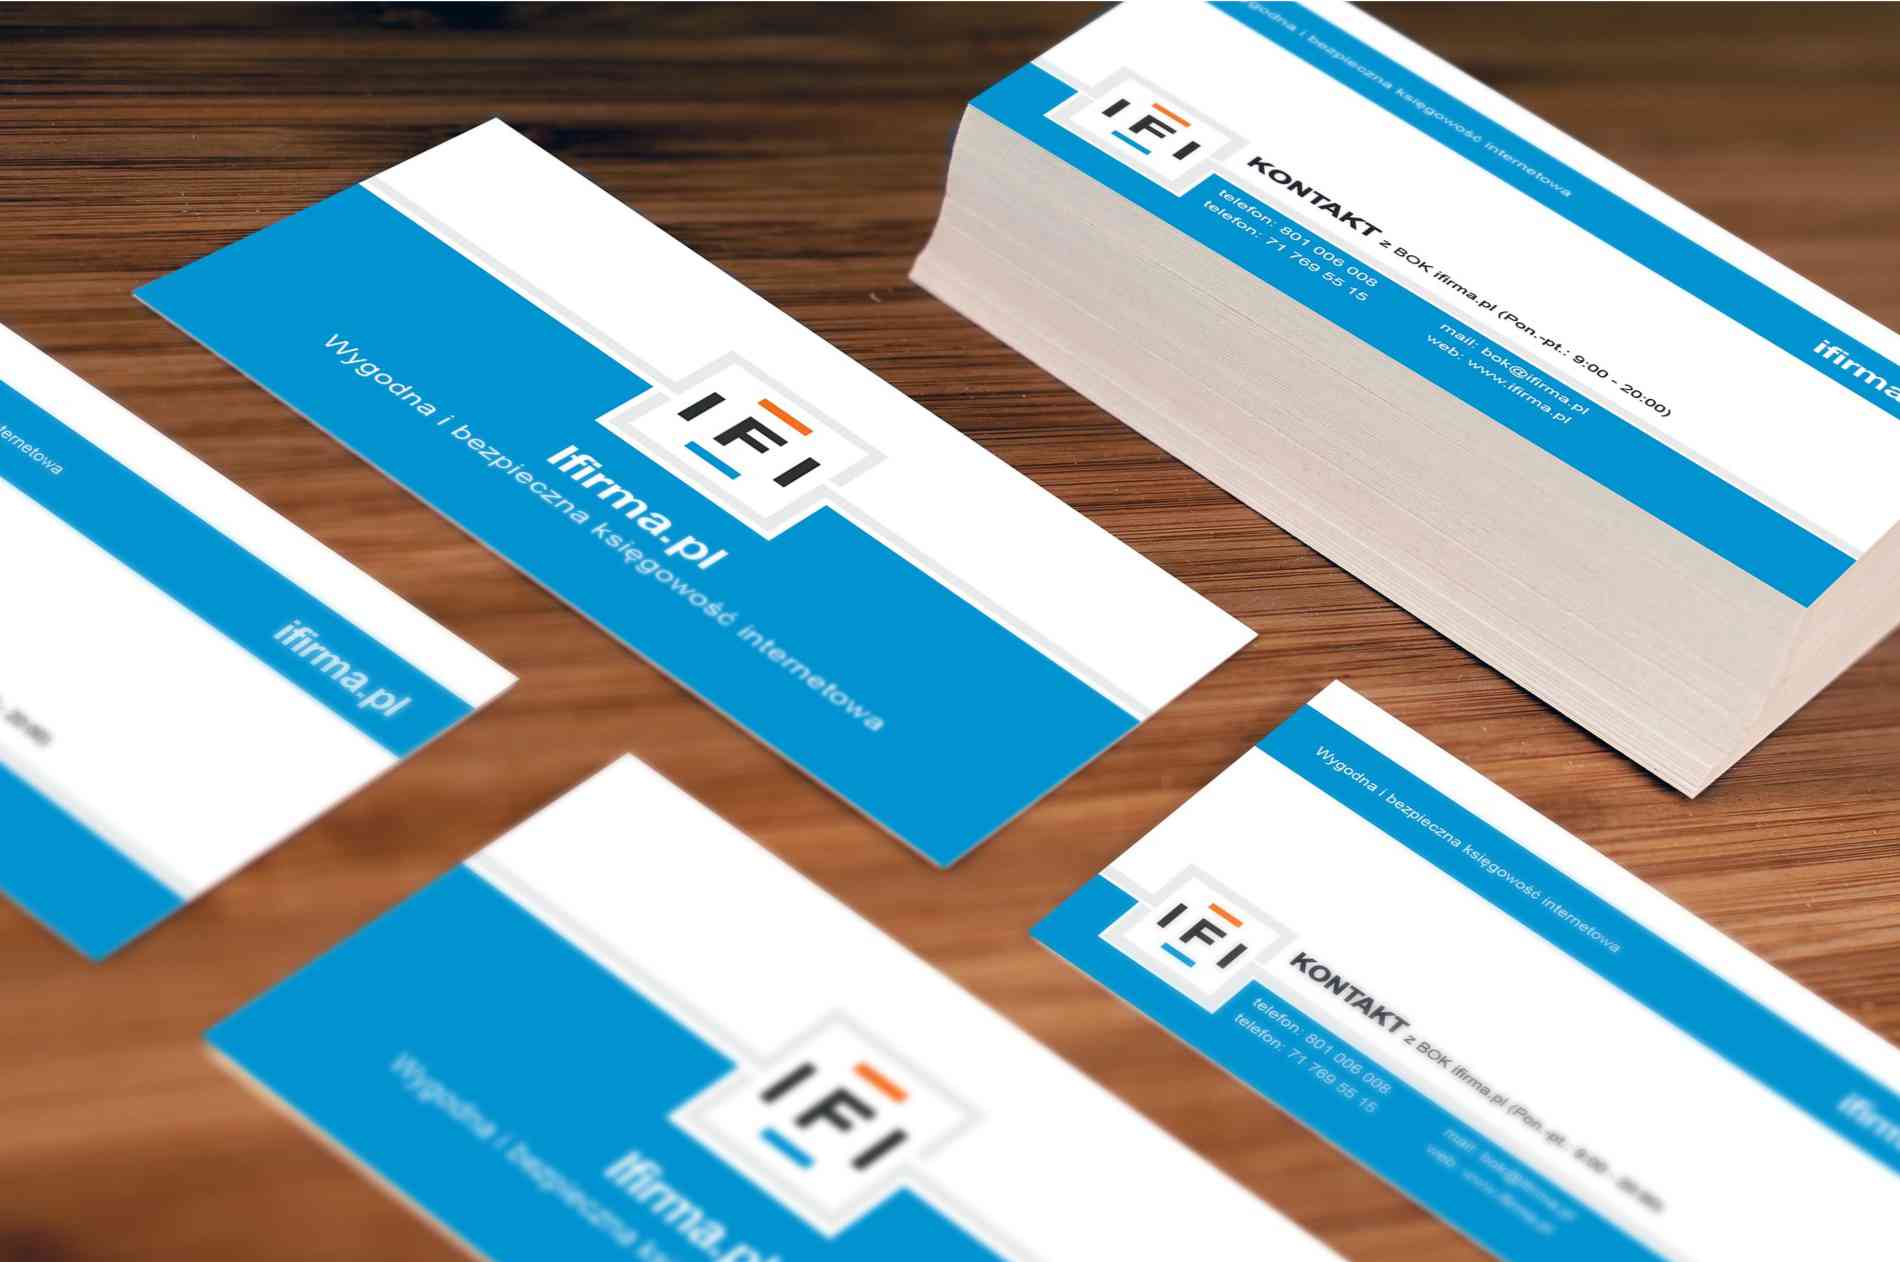 Business stationery: The business card with print24